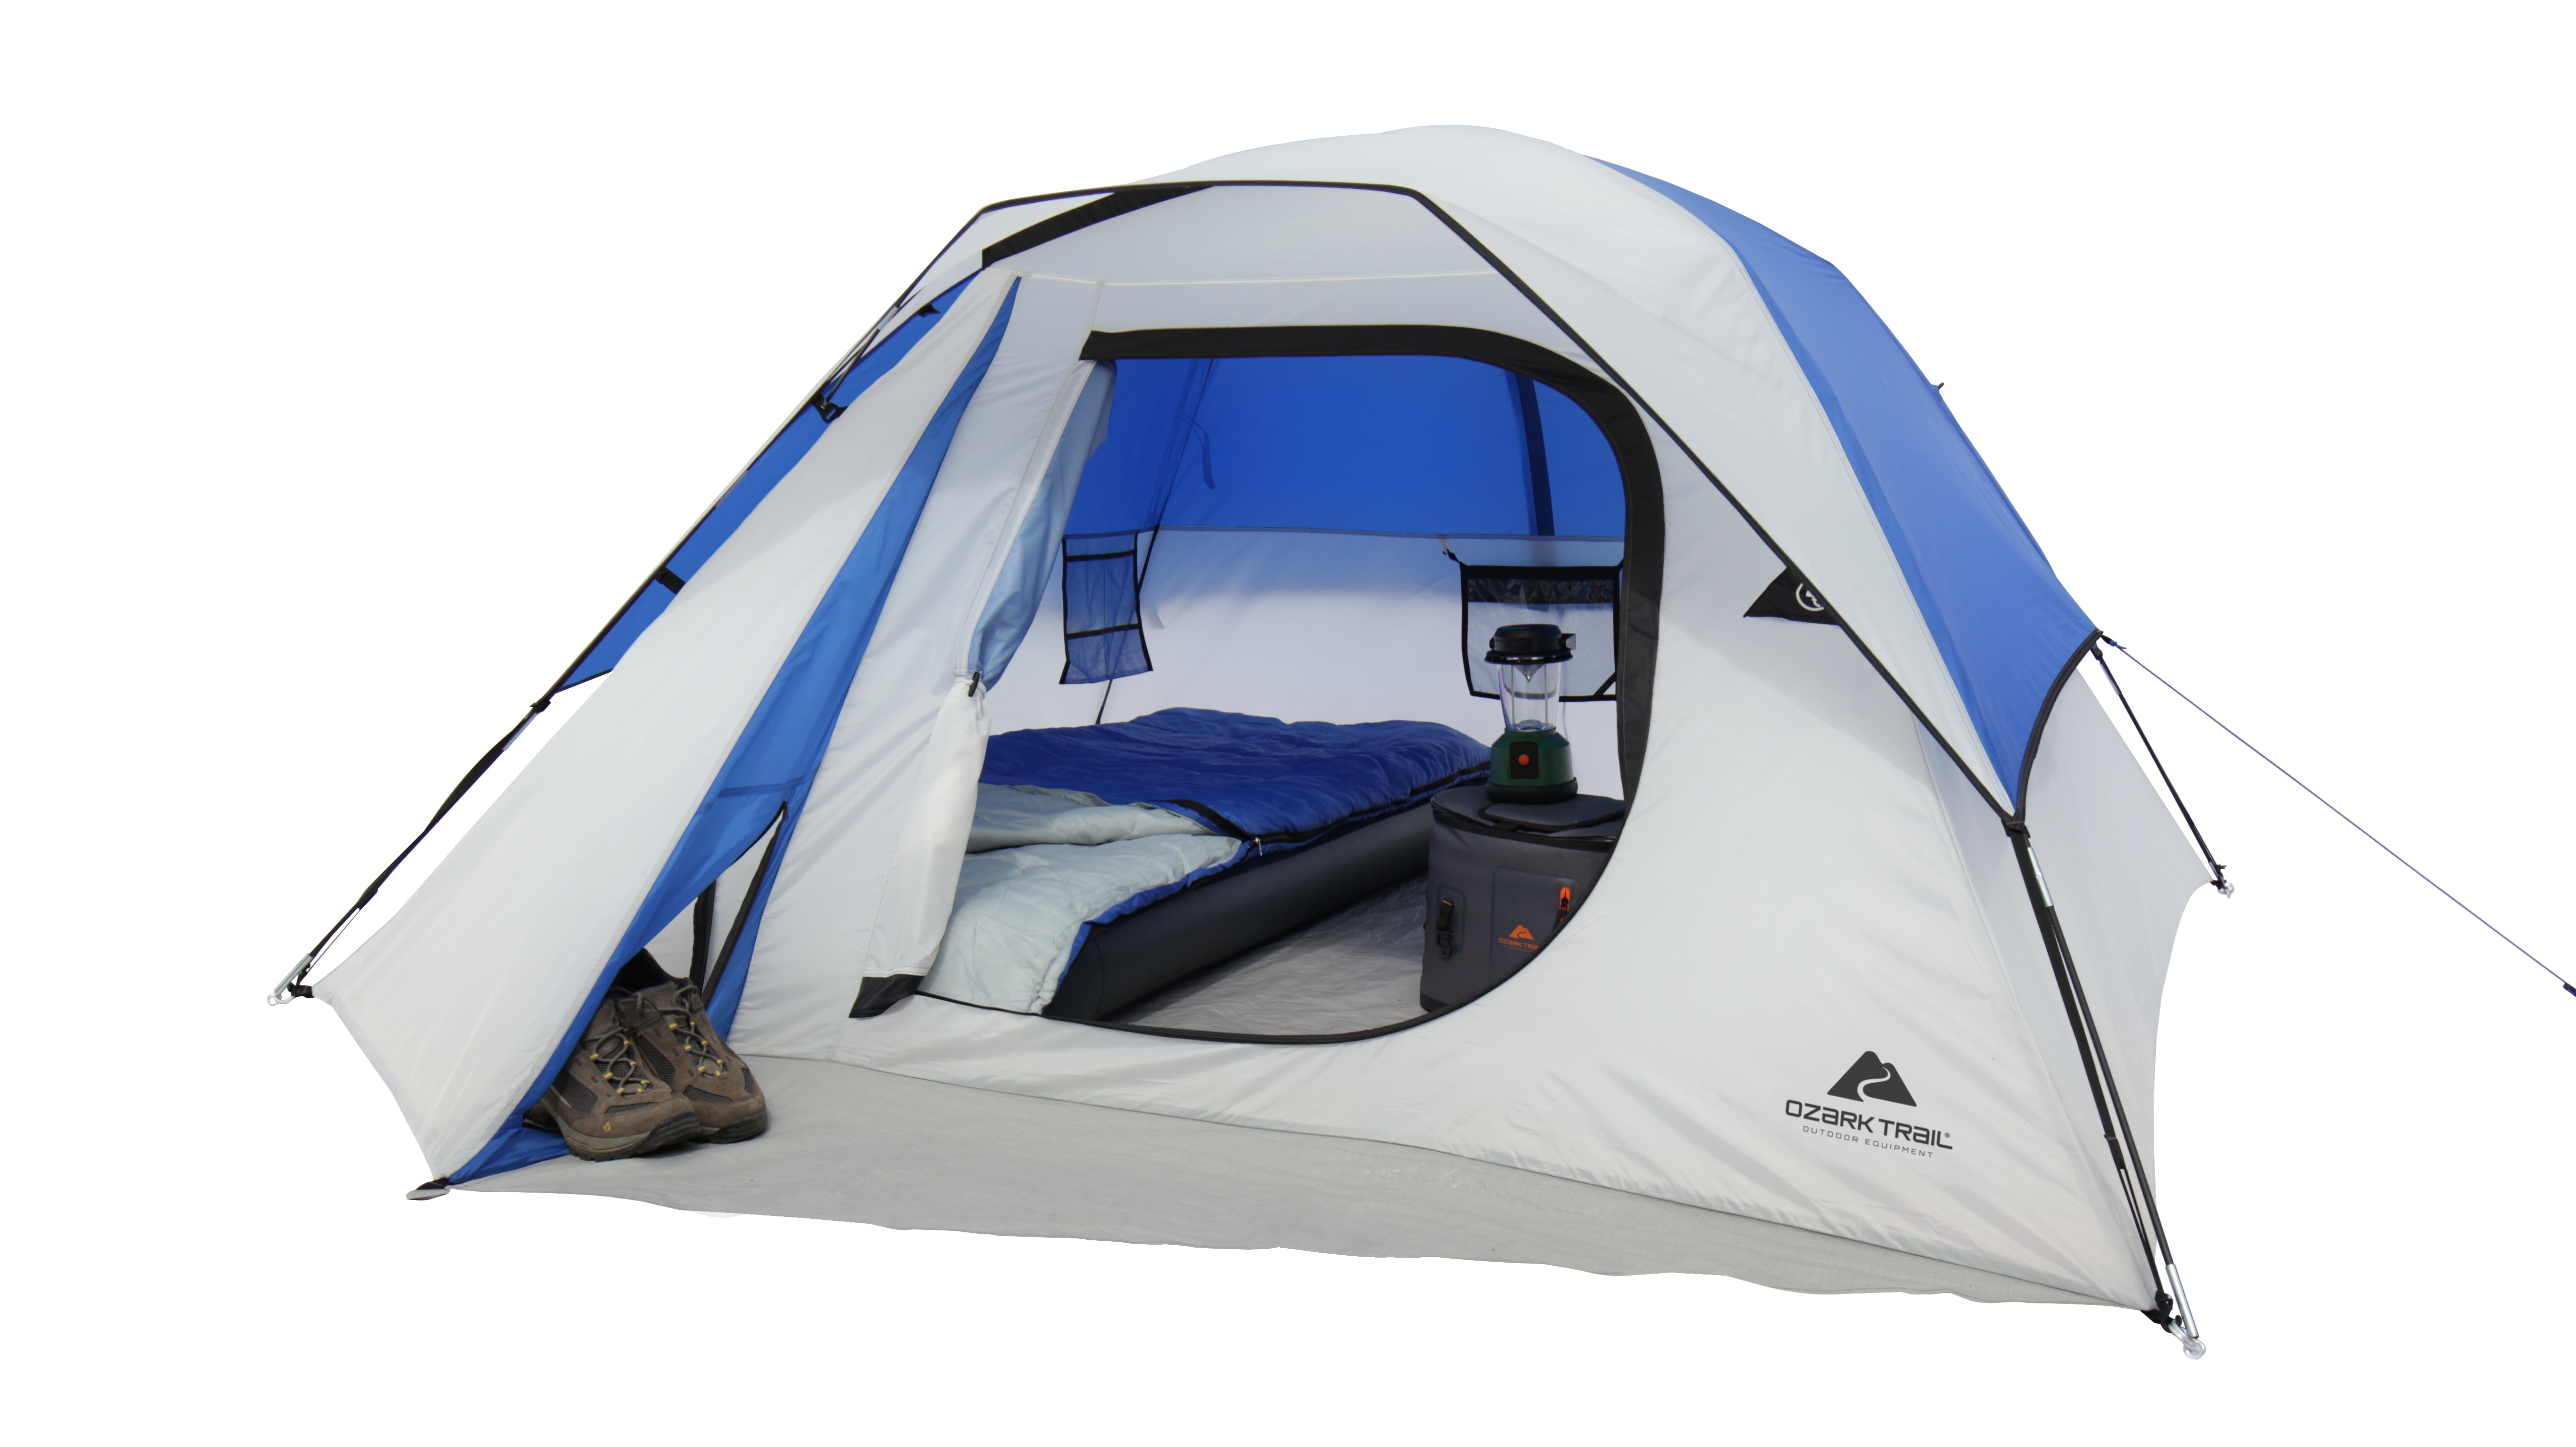 Ozark Trail 4 Person Outdoor Camping Dome Tent